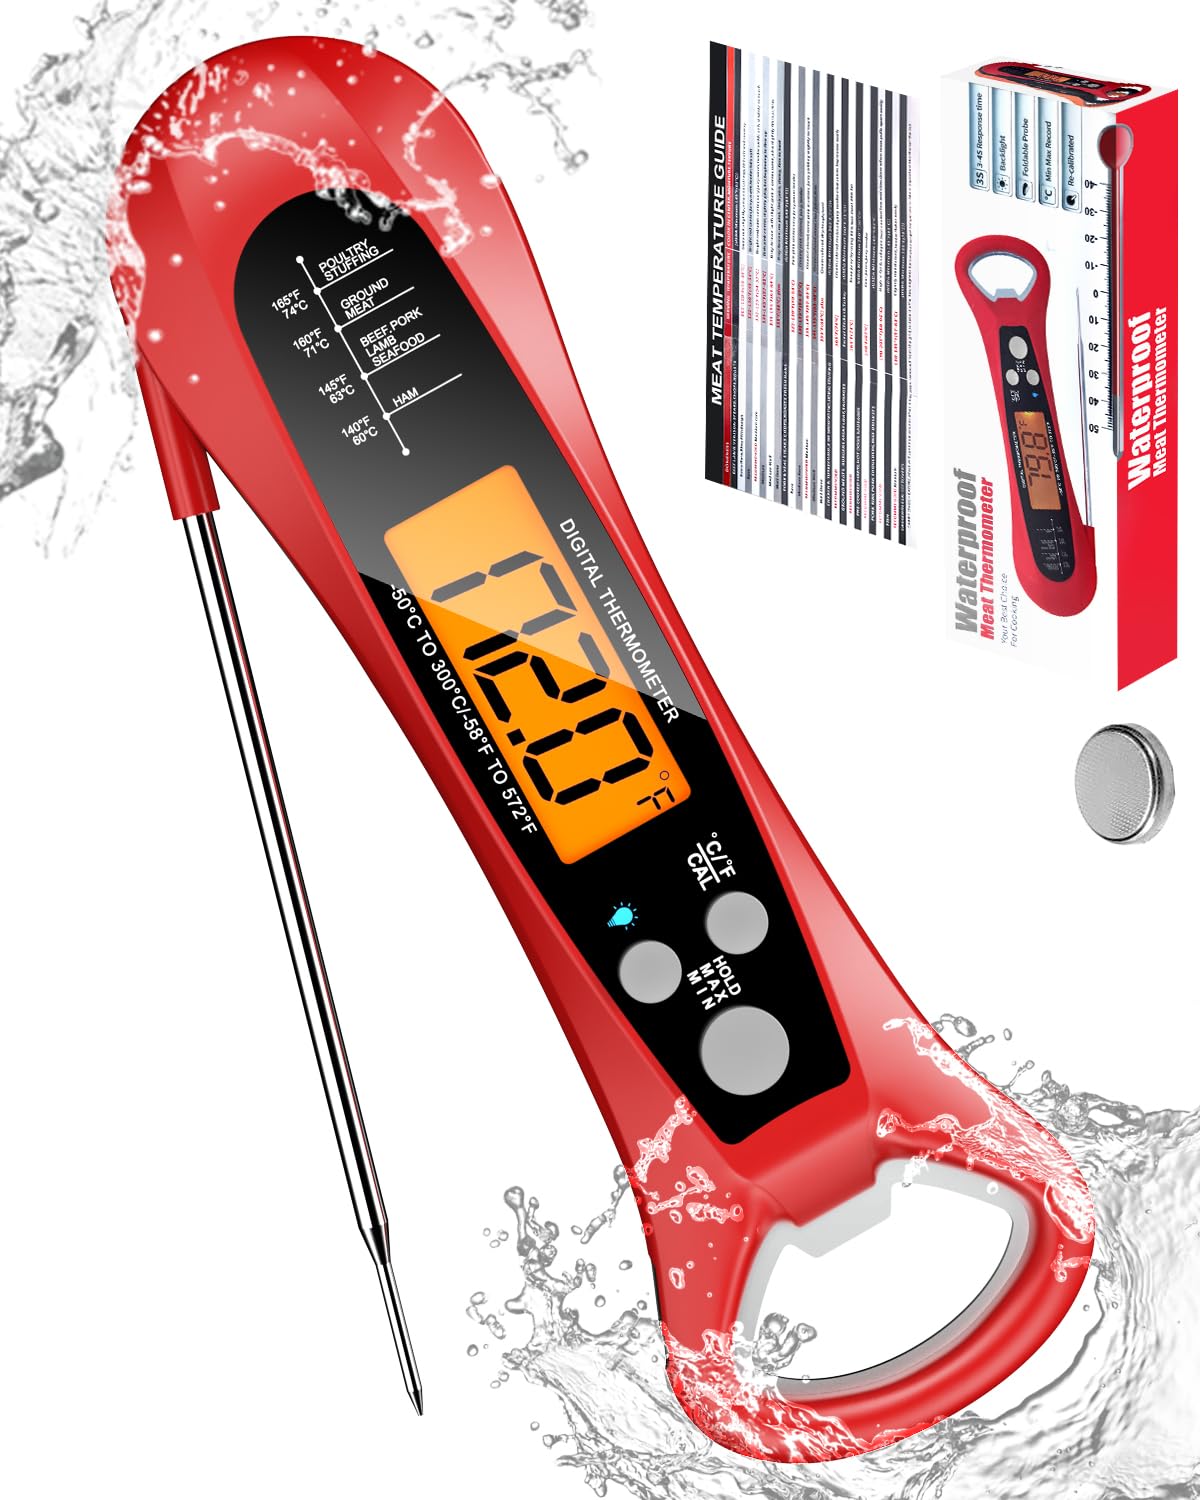 Meat Thermometer Digital, Instant Read Meat Thermometer for Grill and Cooking, Waterproof Food Thermometer for Kitchen and Outside, BBQ, Turkey, Candy, Liquids, Beef